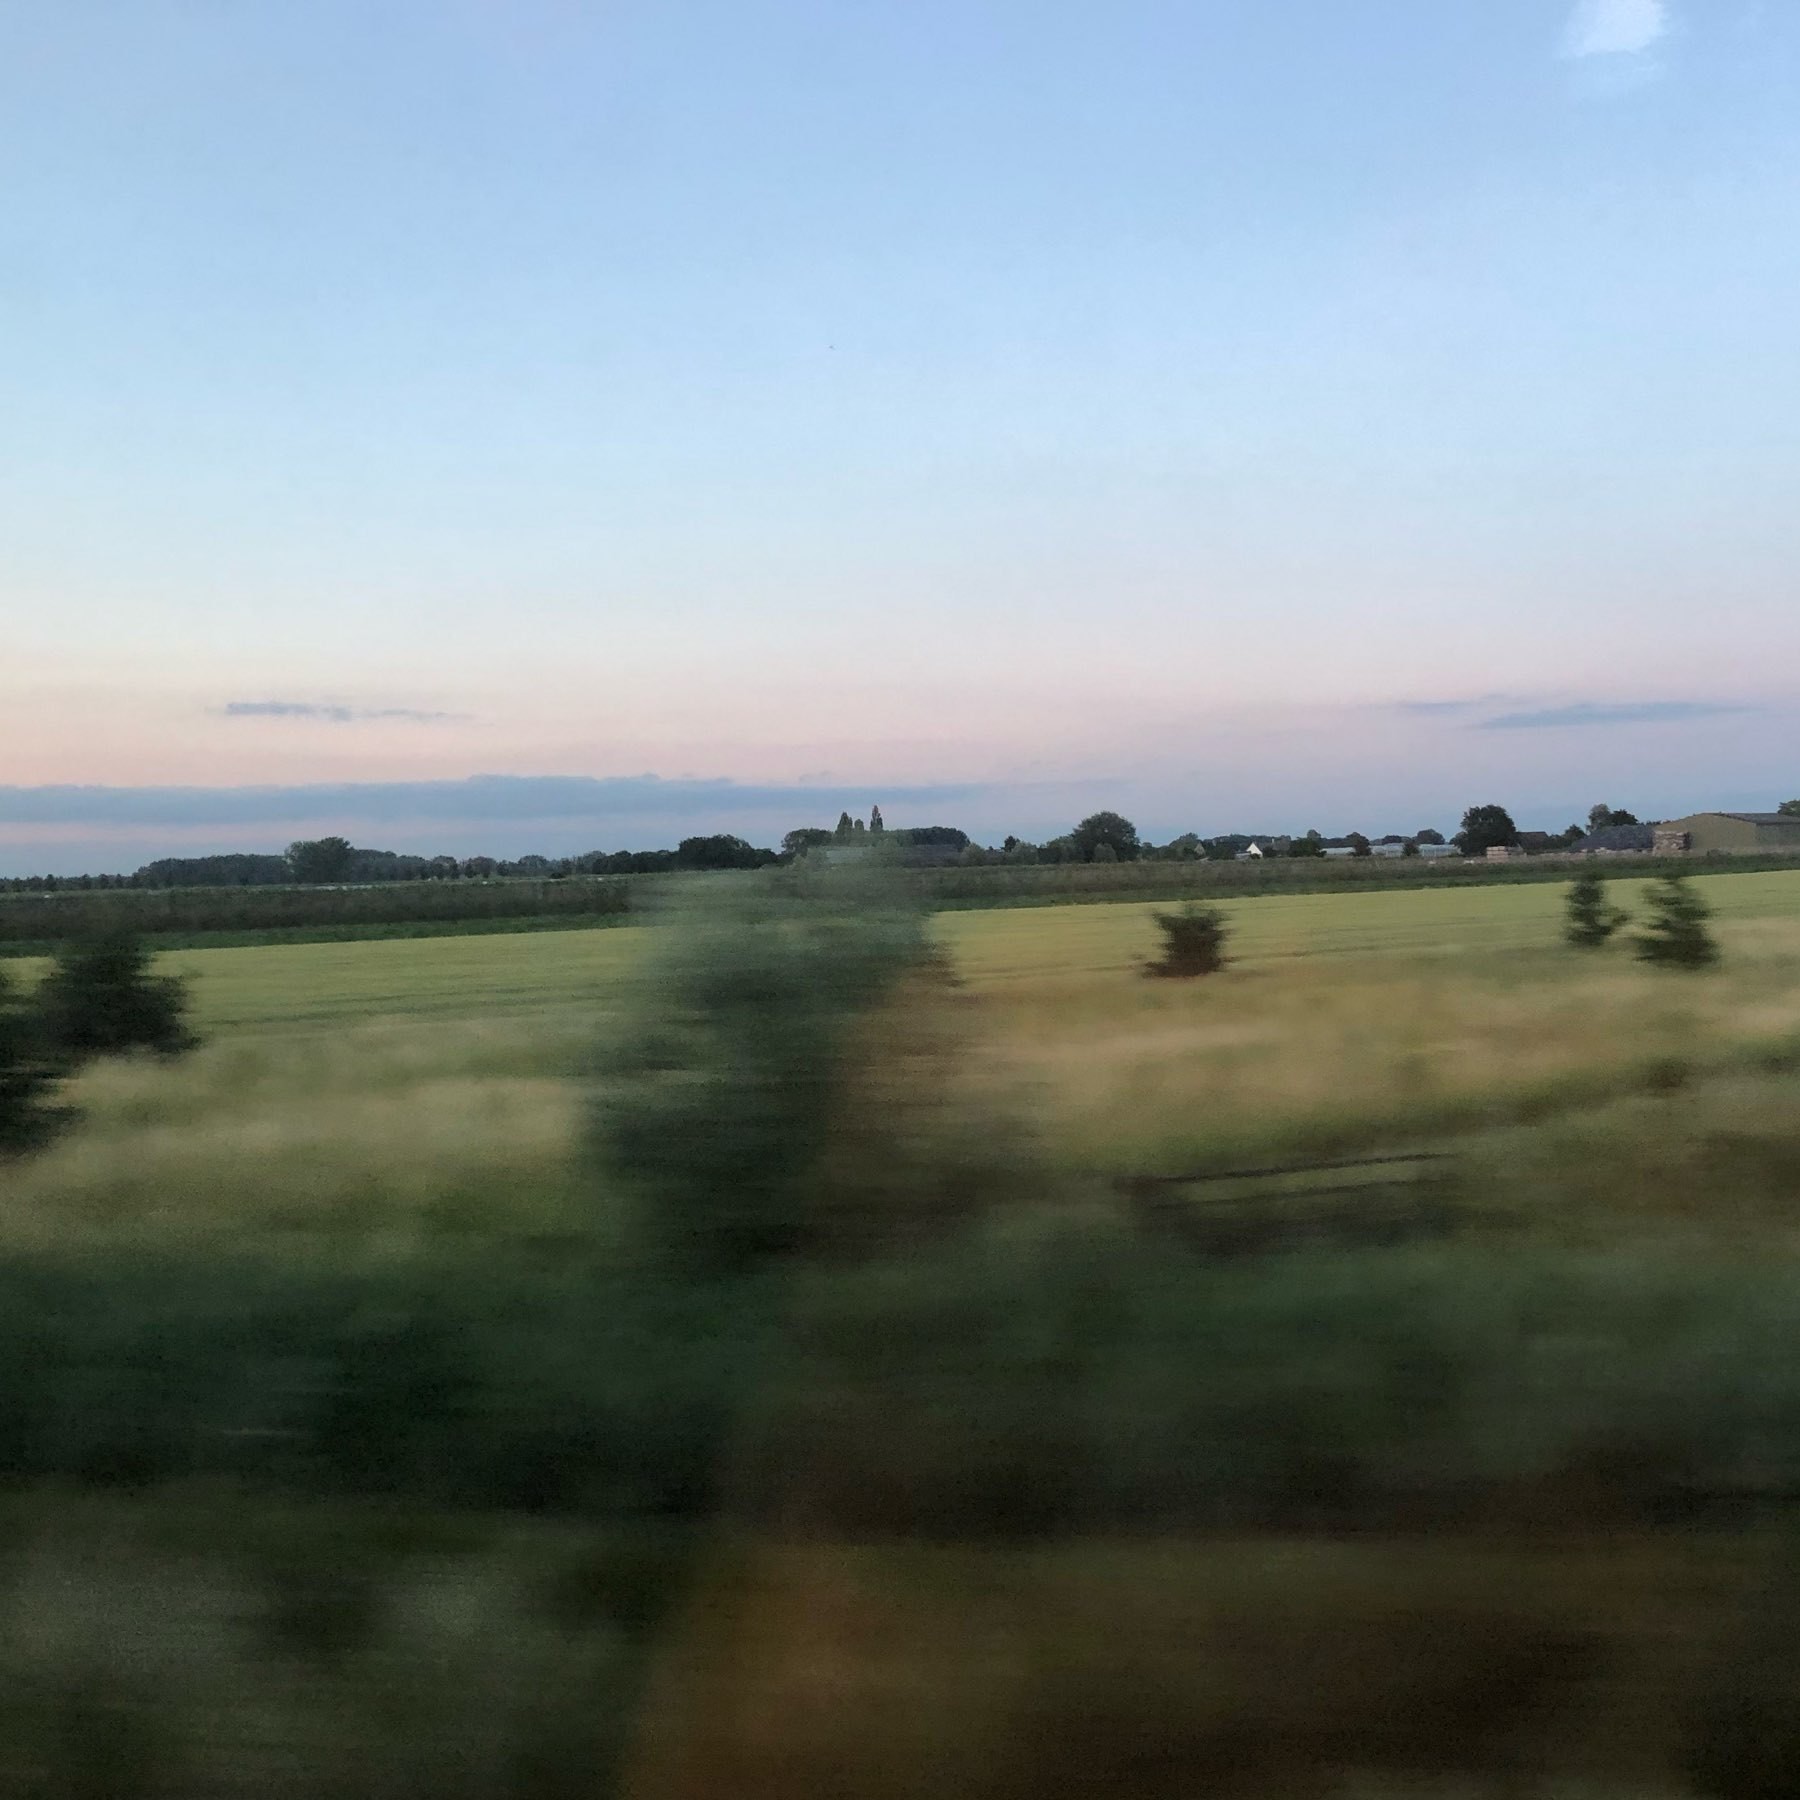 View from a NS train with green scenery and trees.